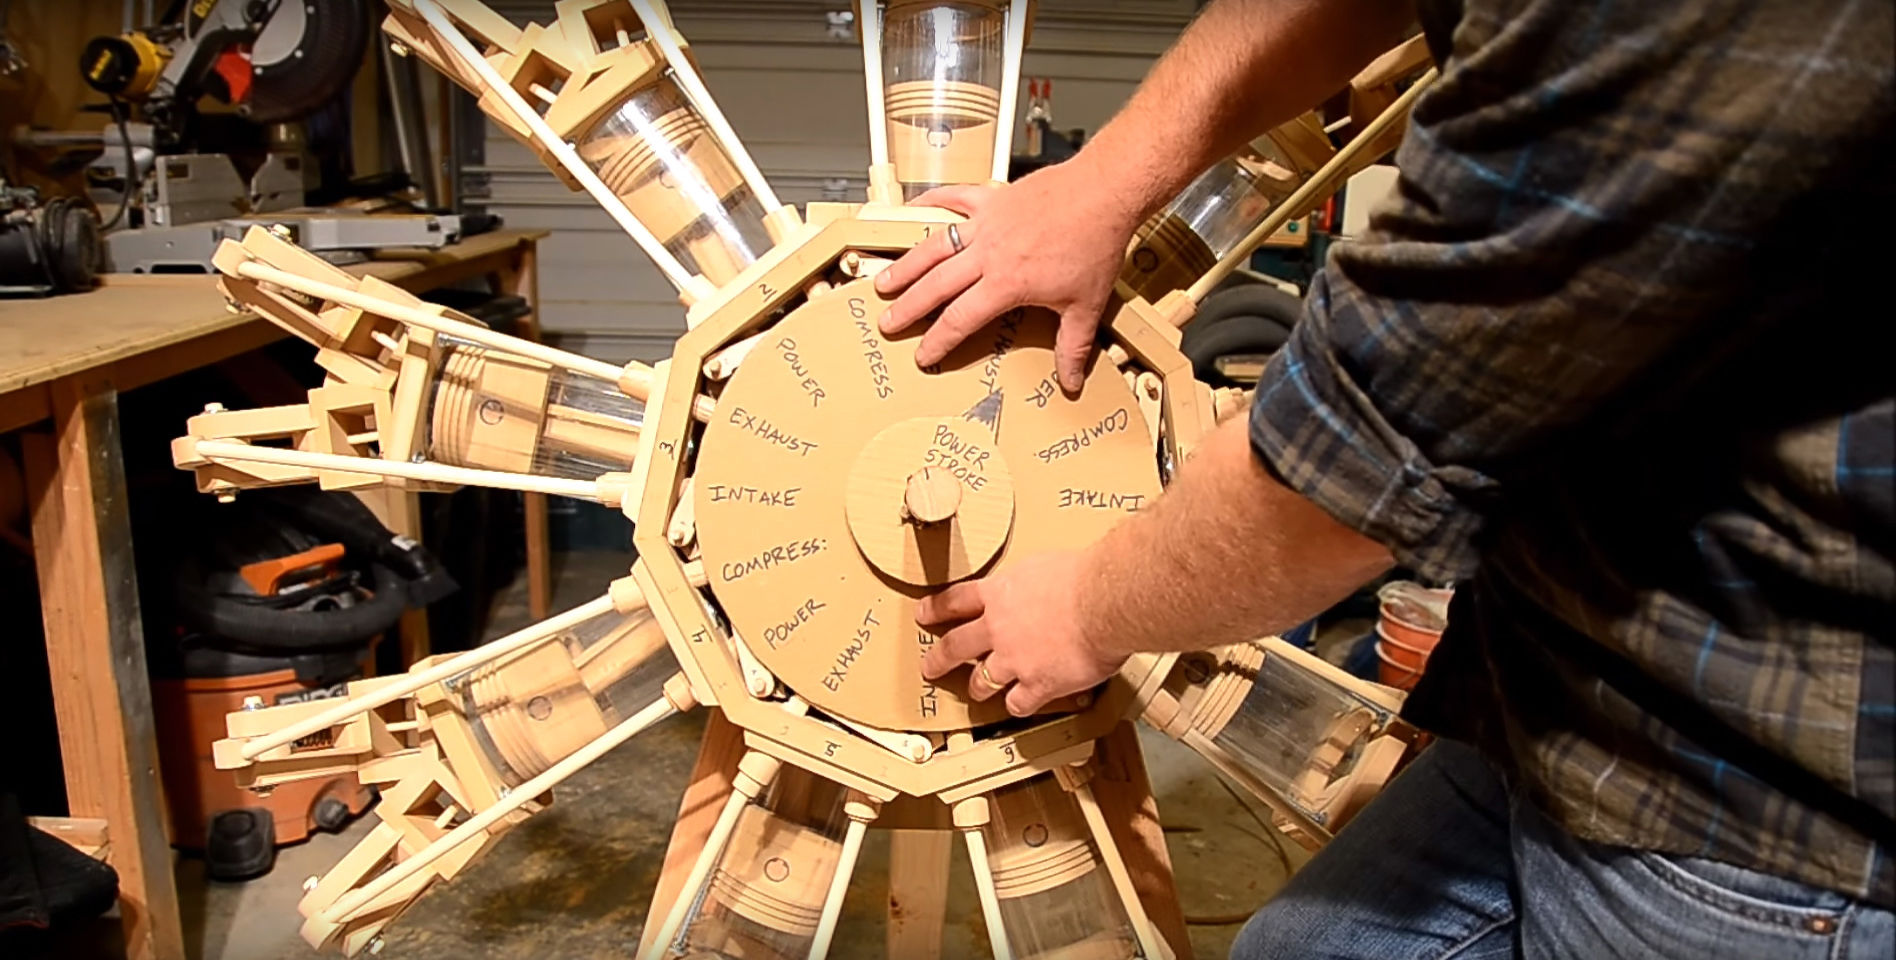 Wood hobbyist Ian Jimmerson took his love of all things mechanical and combined it with his woodworking passion to create a nine-cylinder radial engine out of lumber and plastic. Photo courtesy of Ian Jimmerson.